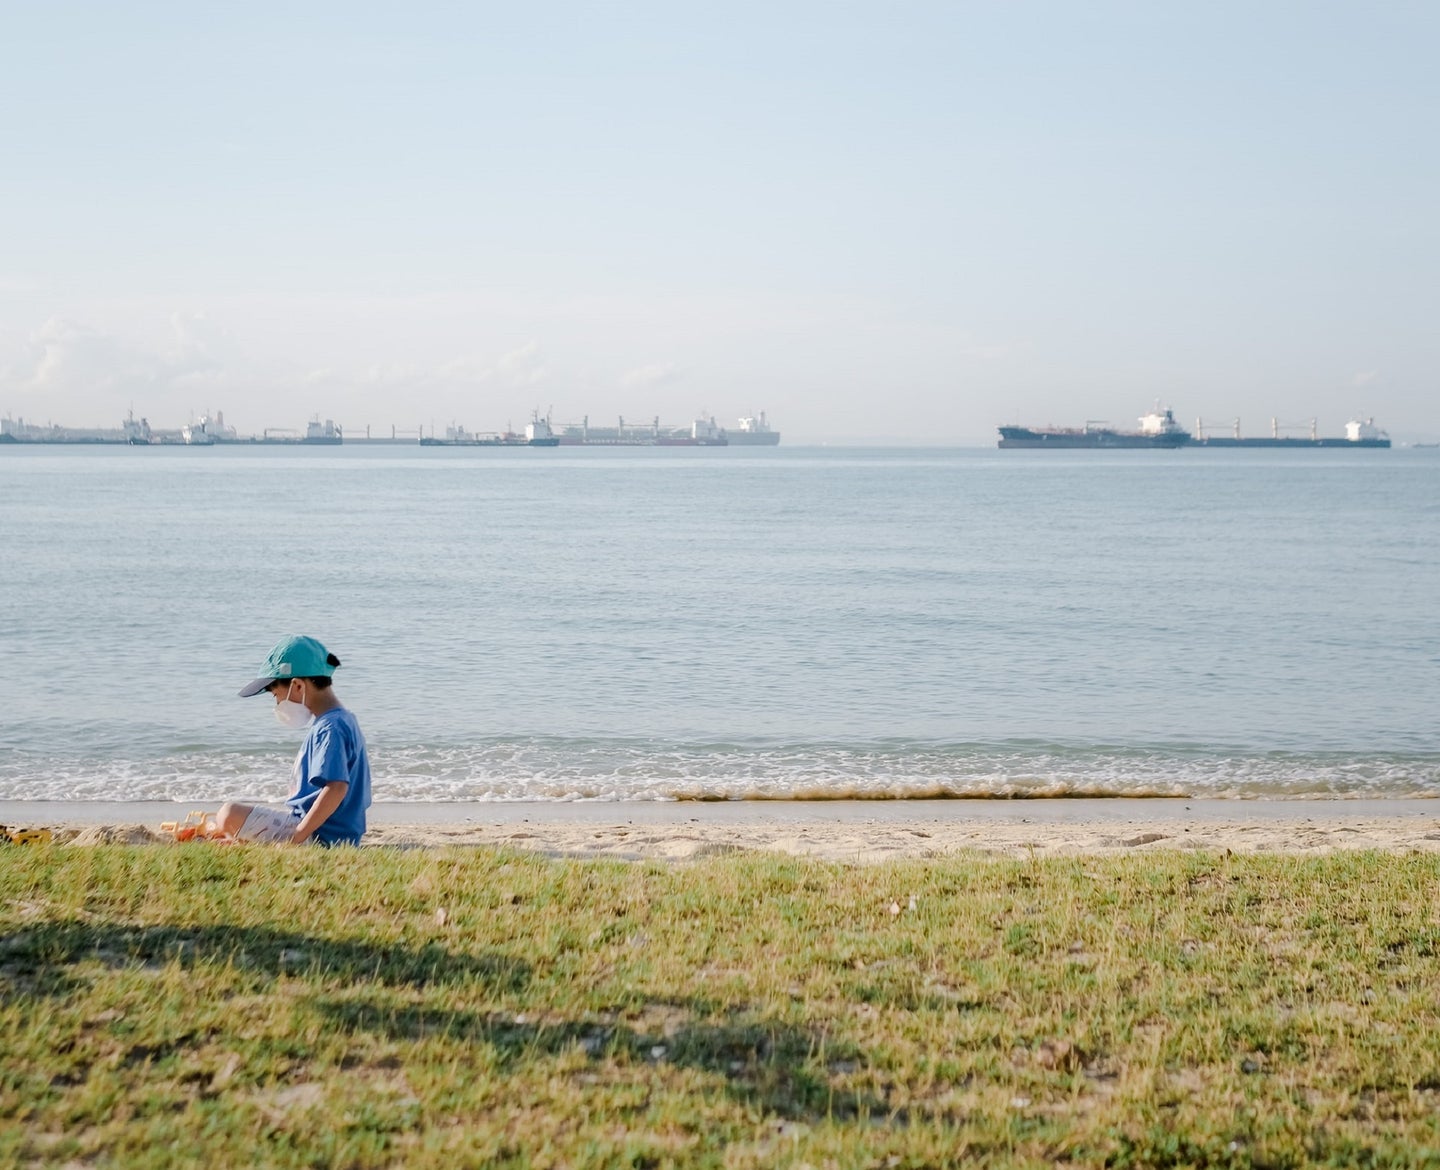 Kid in blue baseball cap and t-shirt sitting on a grassy beach